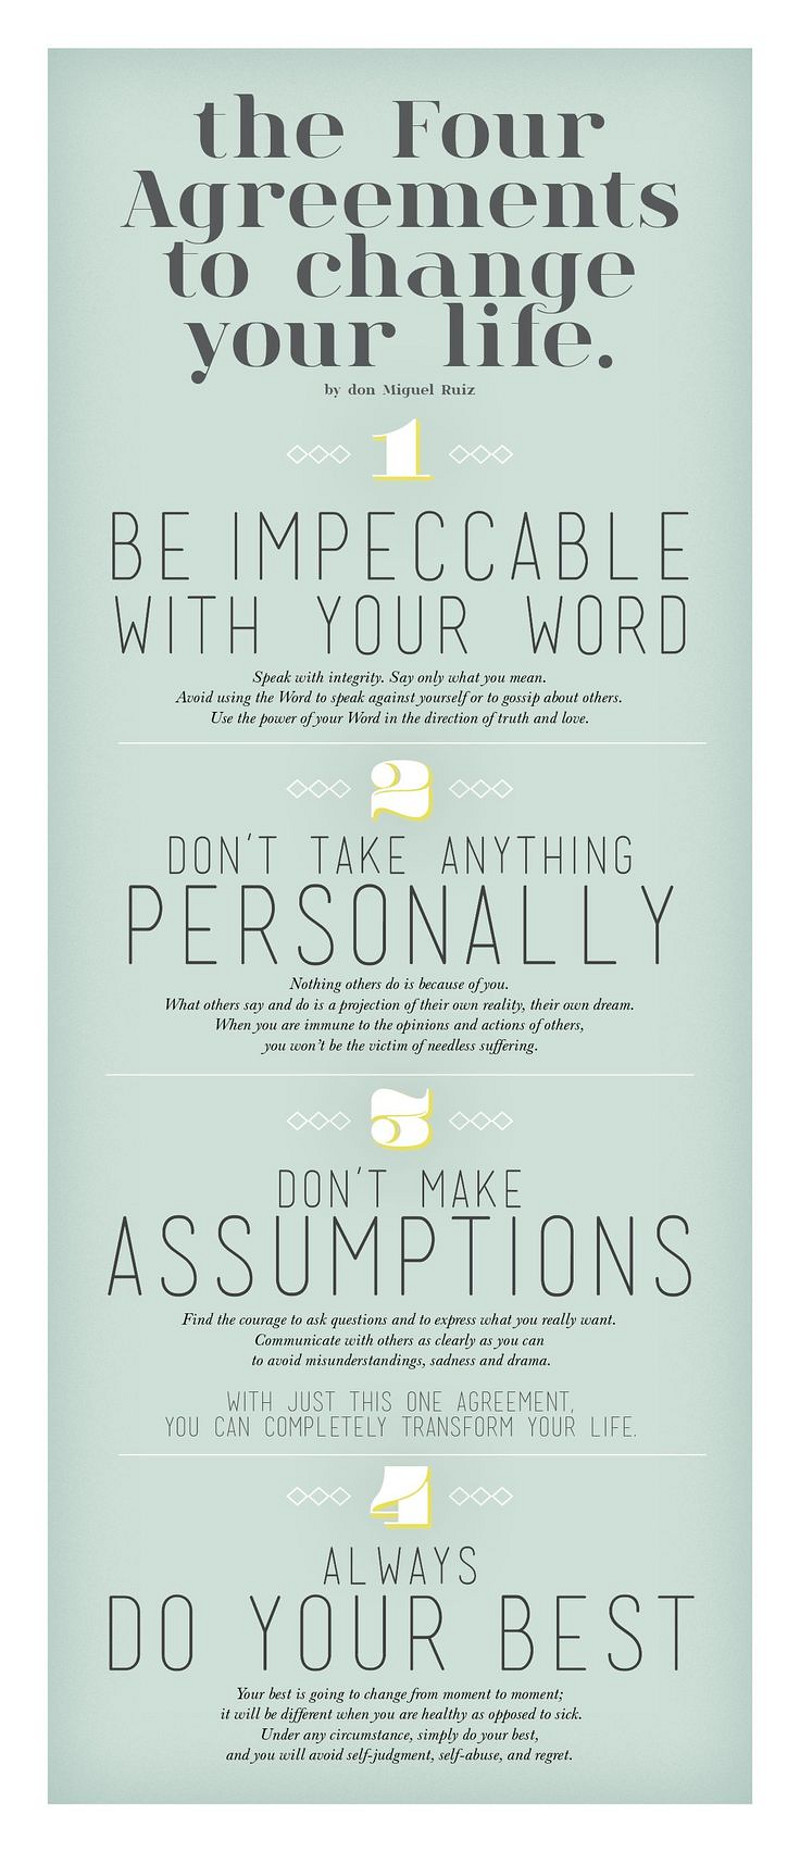 The four agreements to change your life by Miguel Ruiz.